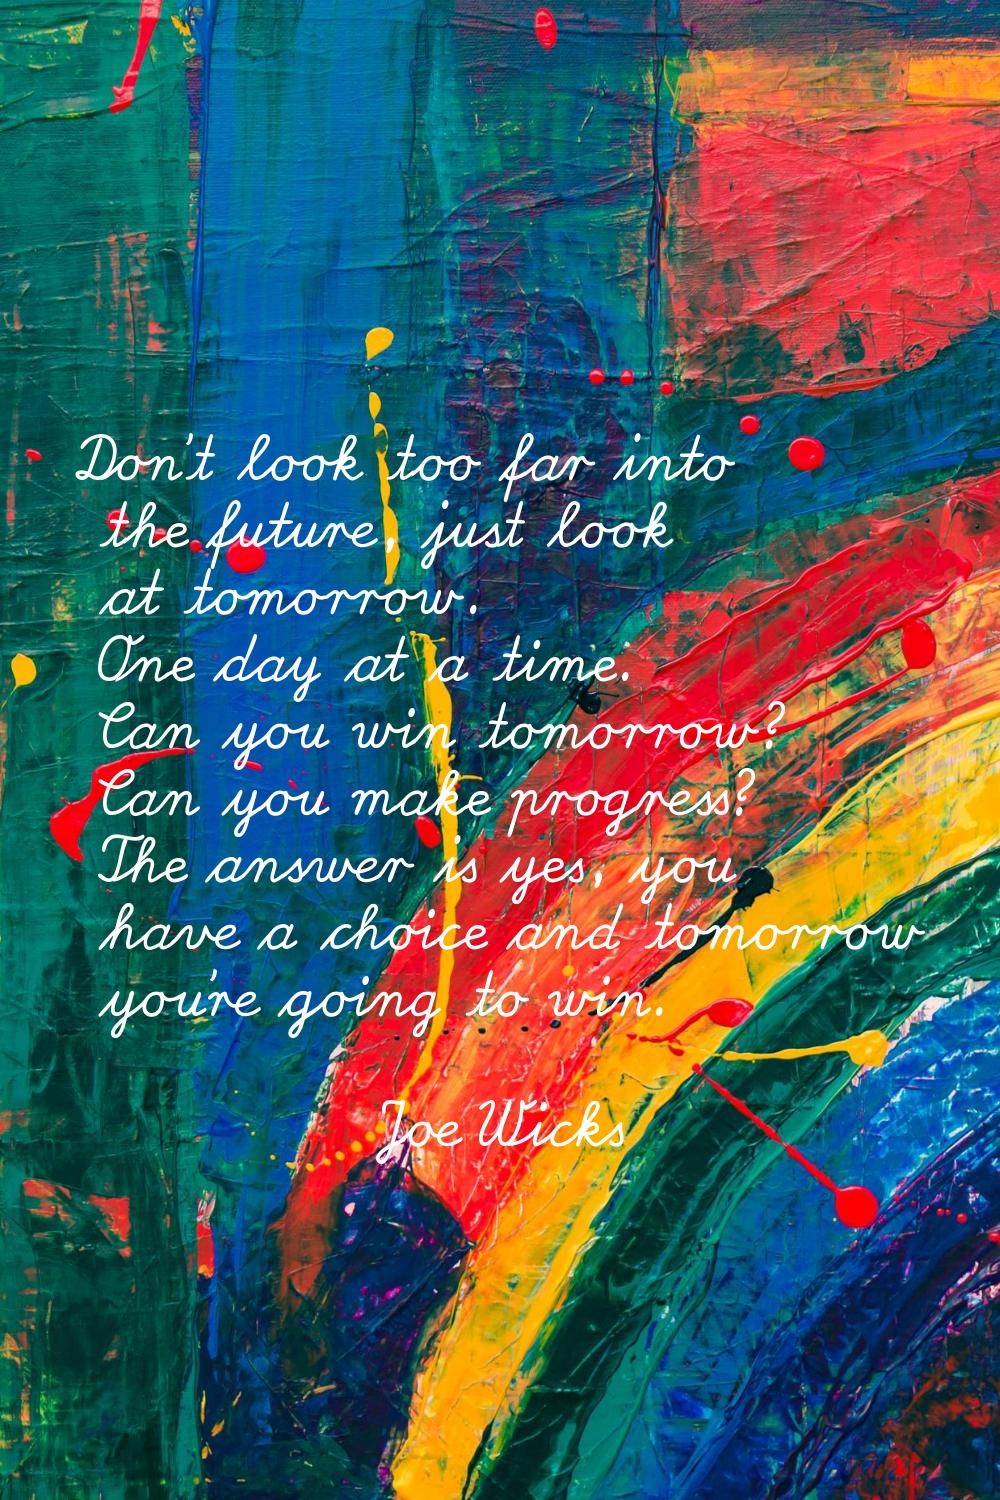 Don't look too far into the future, just look at tomorrow. One day at a time. Can you win tomorrow?